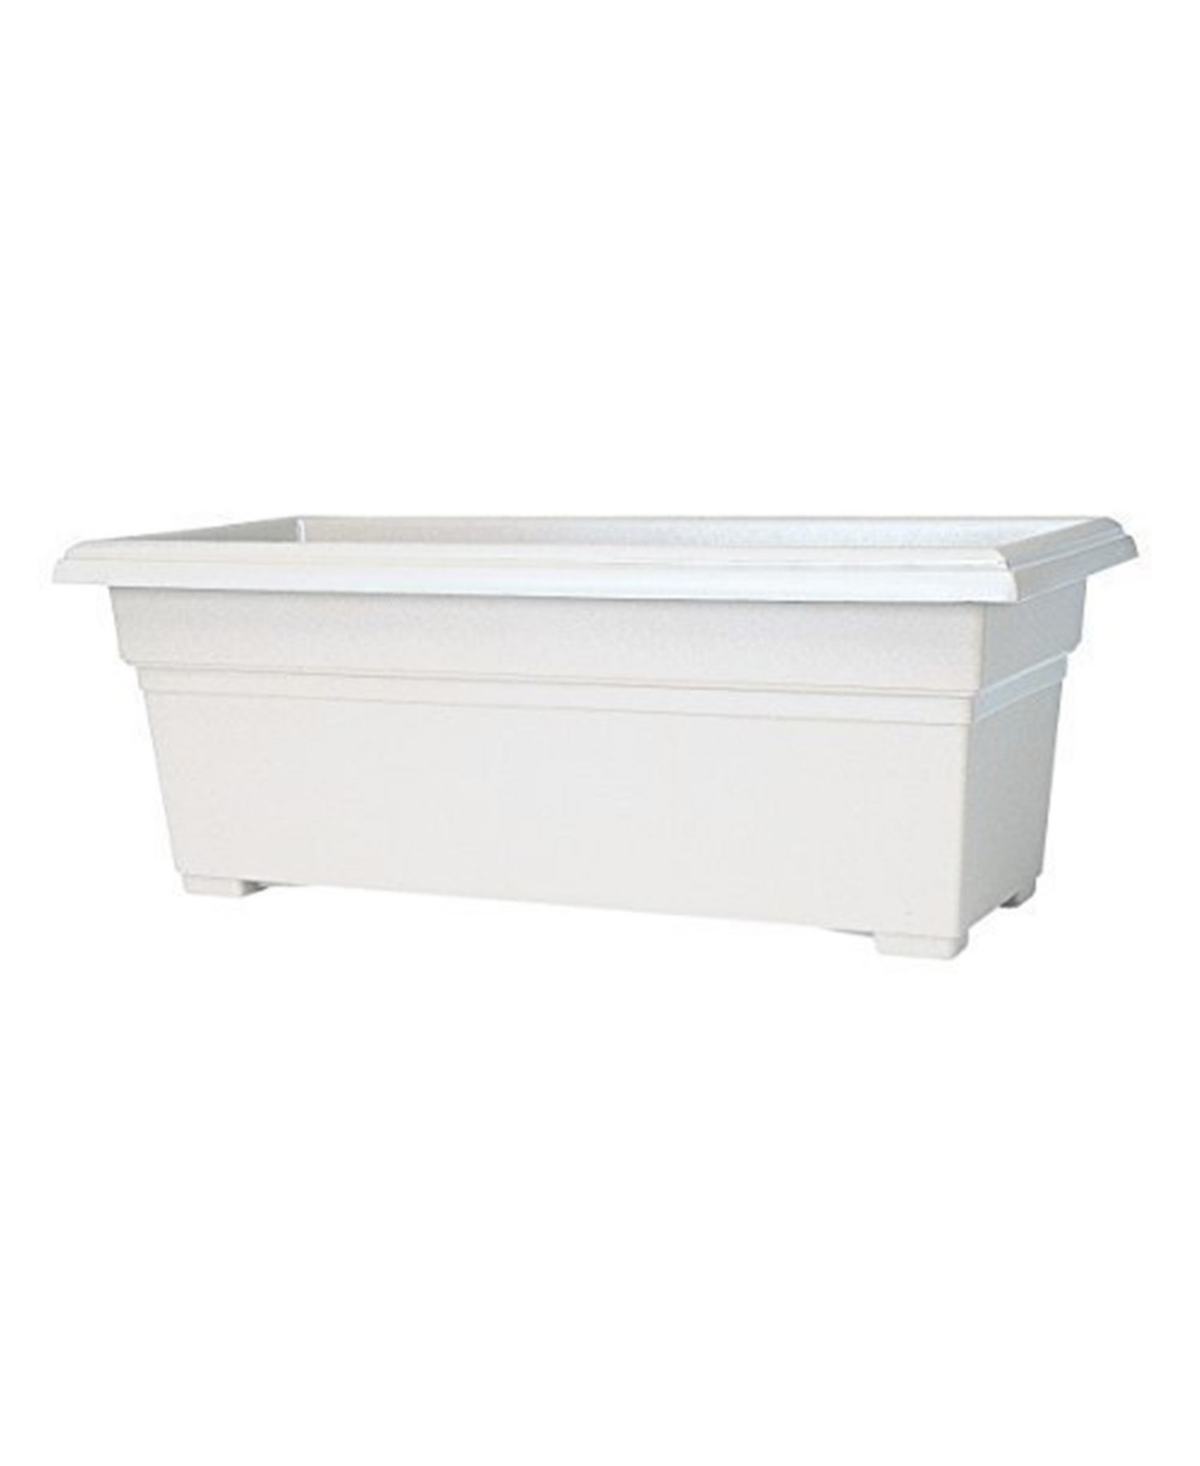 Countryside Patio Planter Box, White, 12 Inch by 27 Inch - White